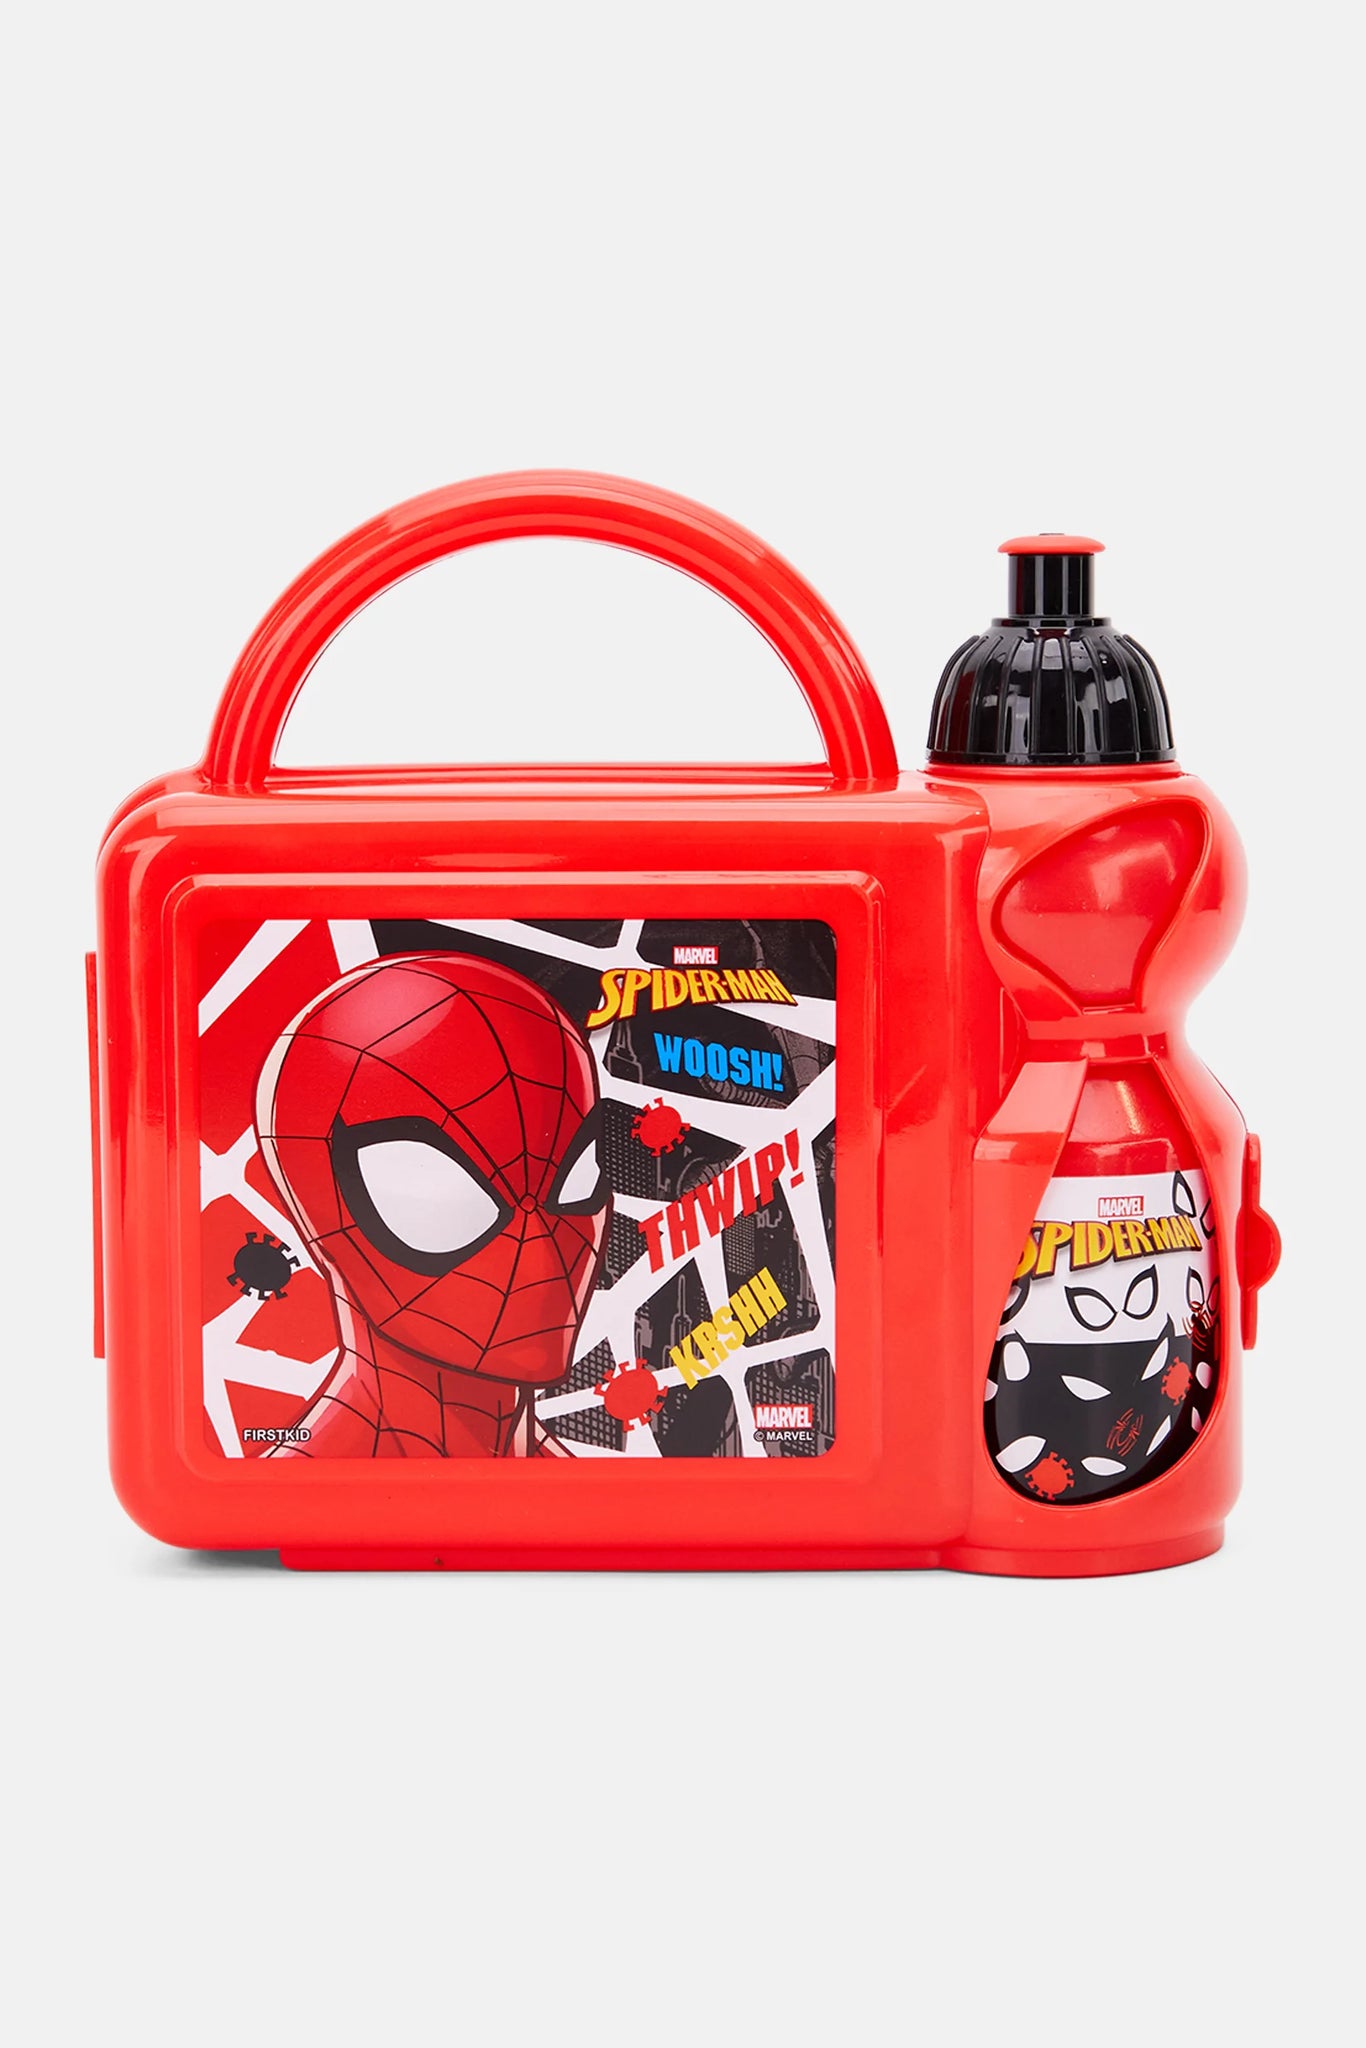 Marvel SpiderMan Lunch Box Combo Set 21 H x 23 L x 7 W cm Red